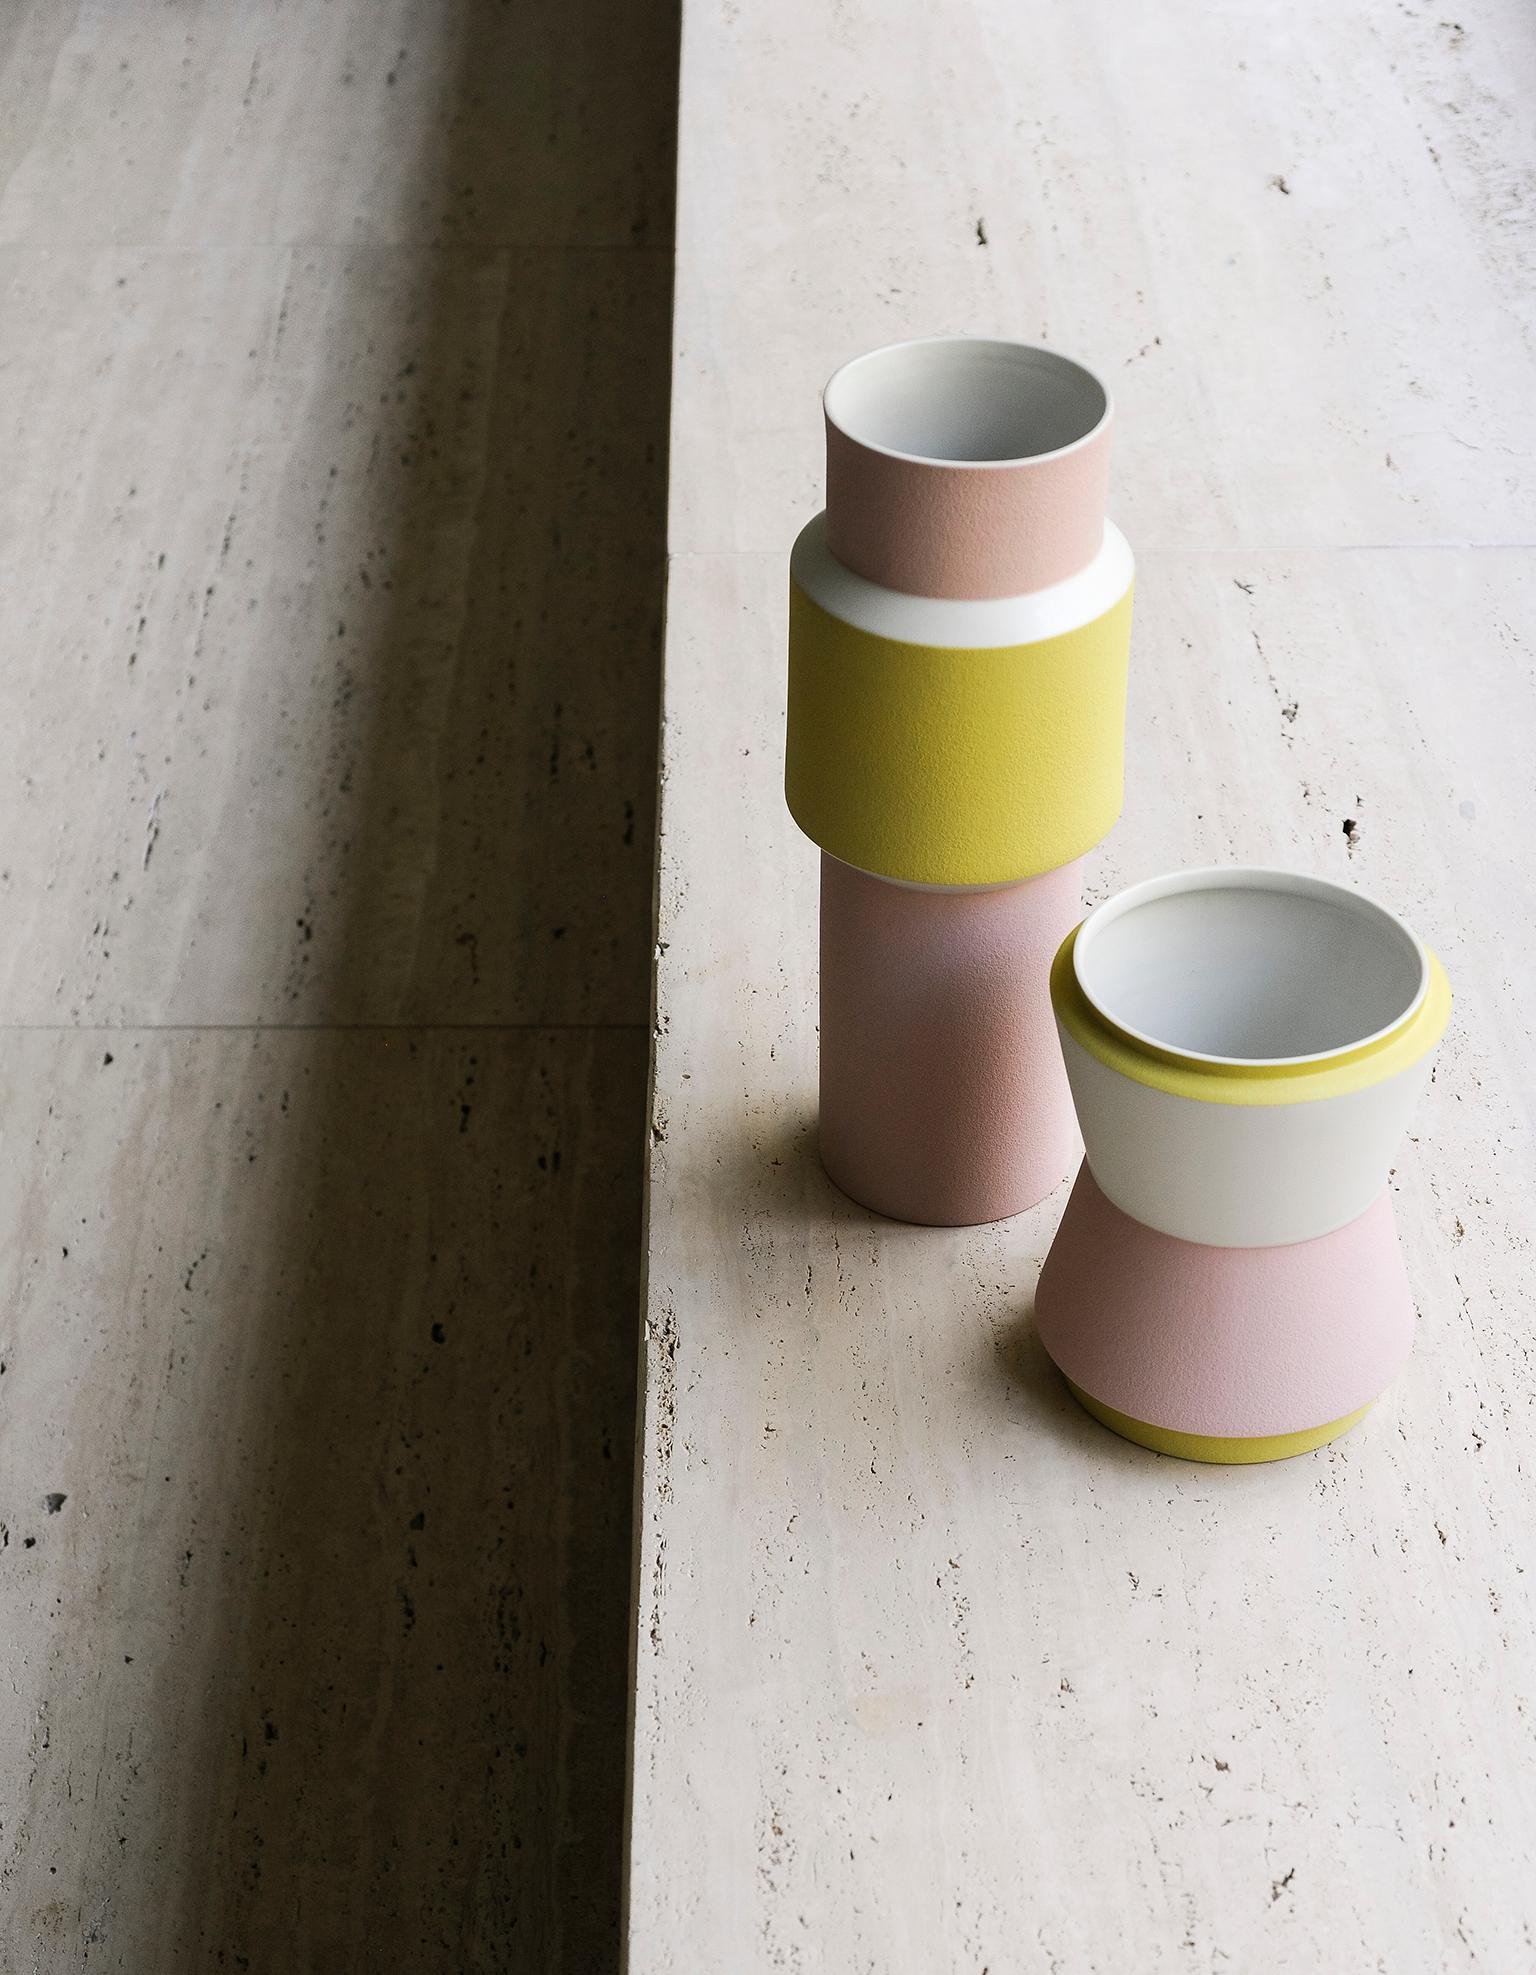 A shape and a material that represent classical, almost primordial elements of design objects: the porcelain pot. Maria Gabriella Zecca’s Vasum design arose by developing and overlaying elementary geometrical shapes: each portion features a colour,